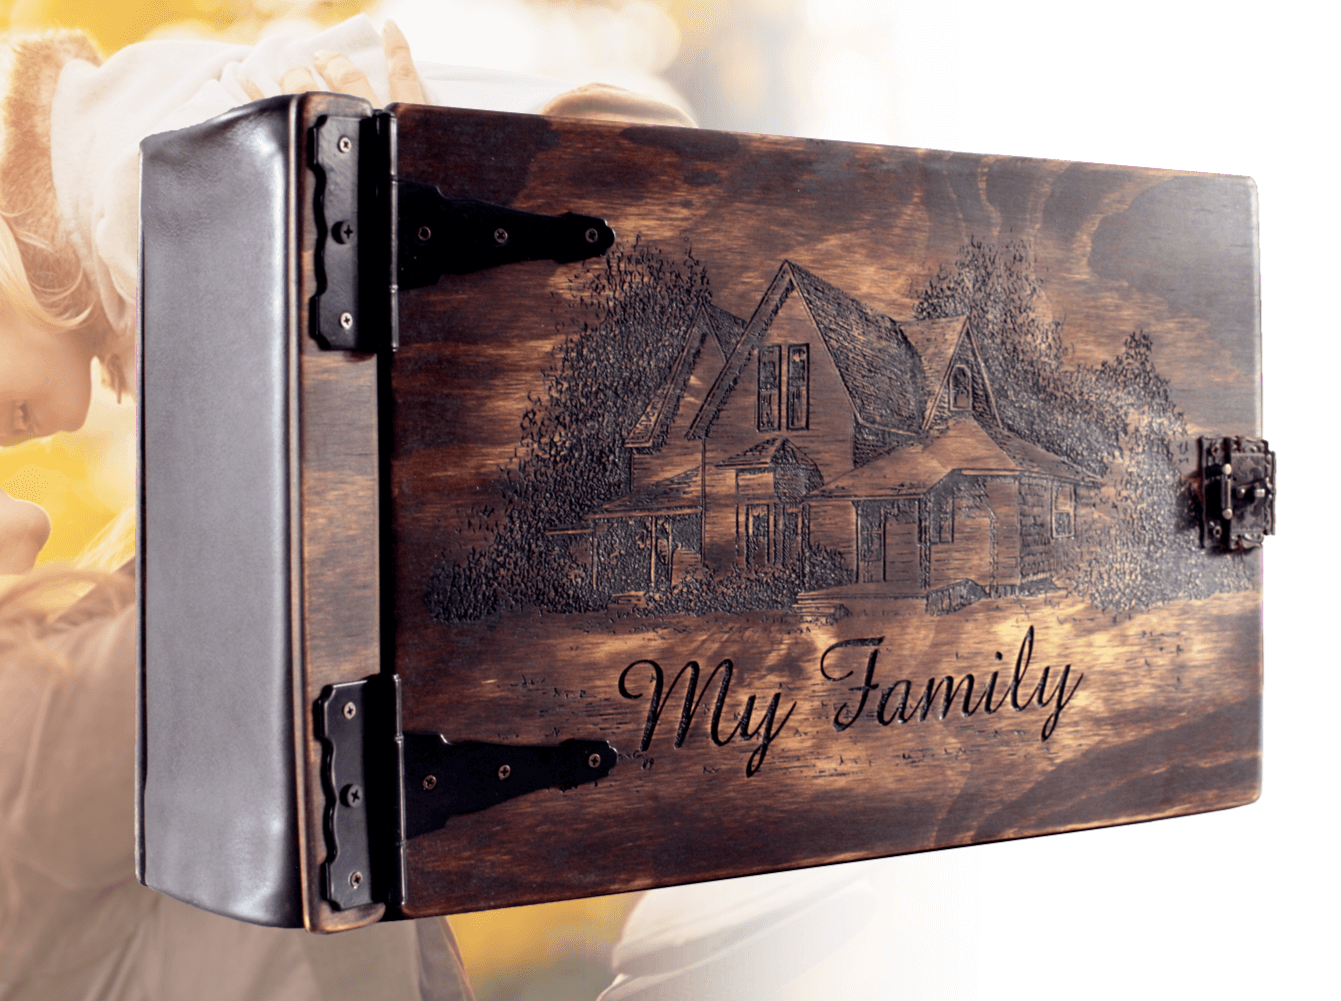 Family Memories Chronicle | Keep your family's special moments alive with a custom photo album by Rustic Engravings. The perfect gift to cherish your family's history and legacy.